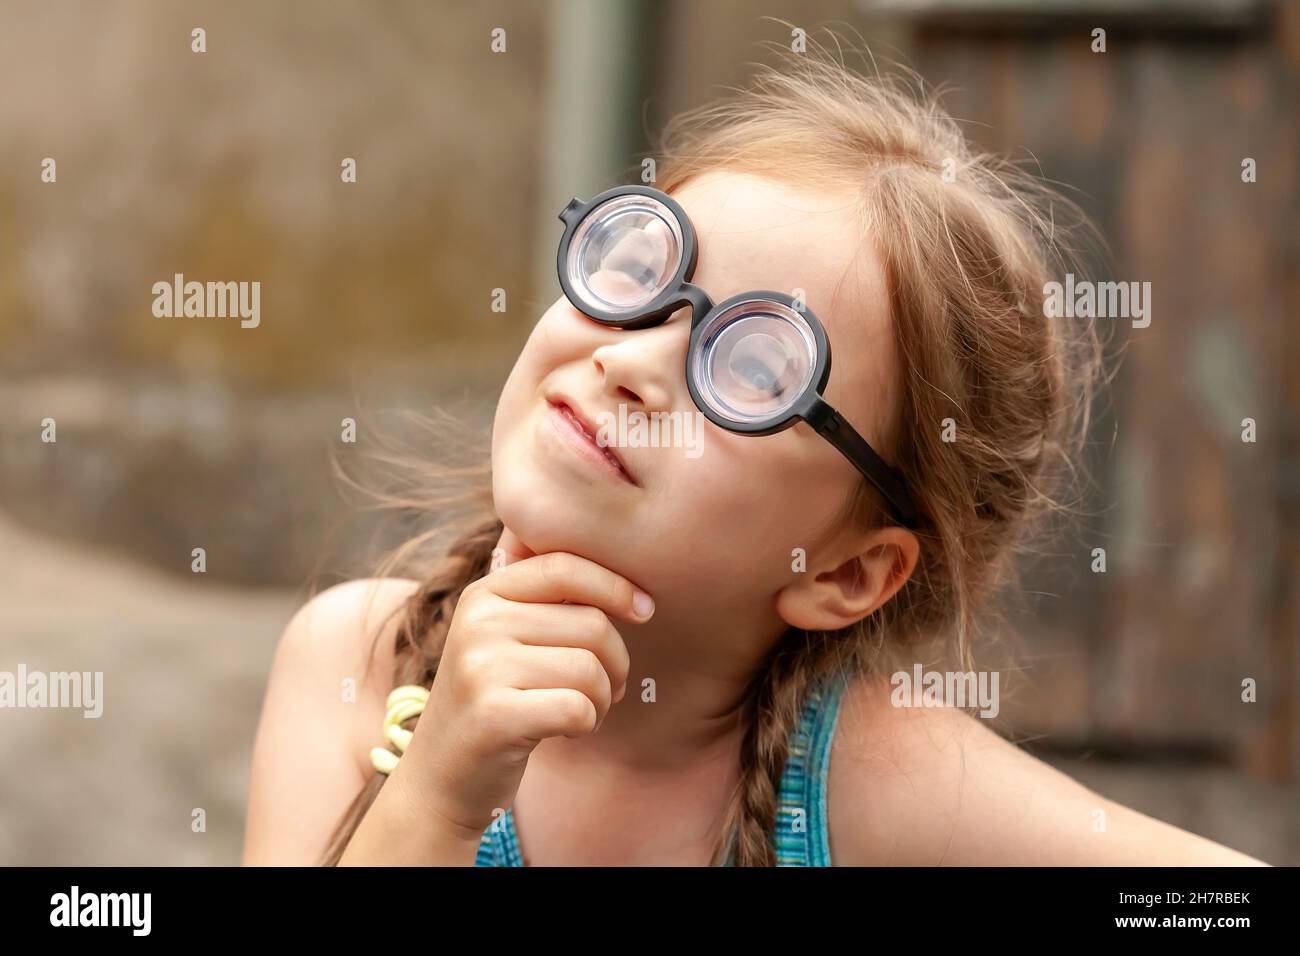 Clever intelligent genius elementary school age girl wearing big funny quirky glasses, wondering, thinking intensely, hand under chin, looking up port Stock Photo